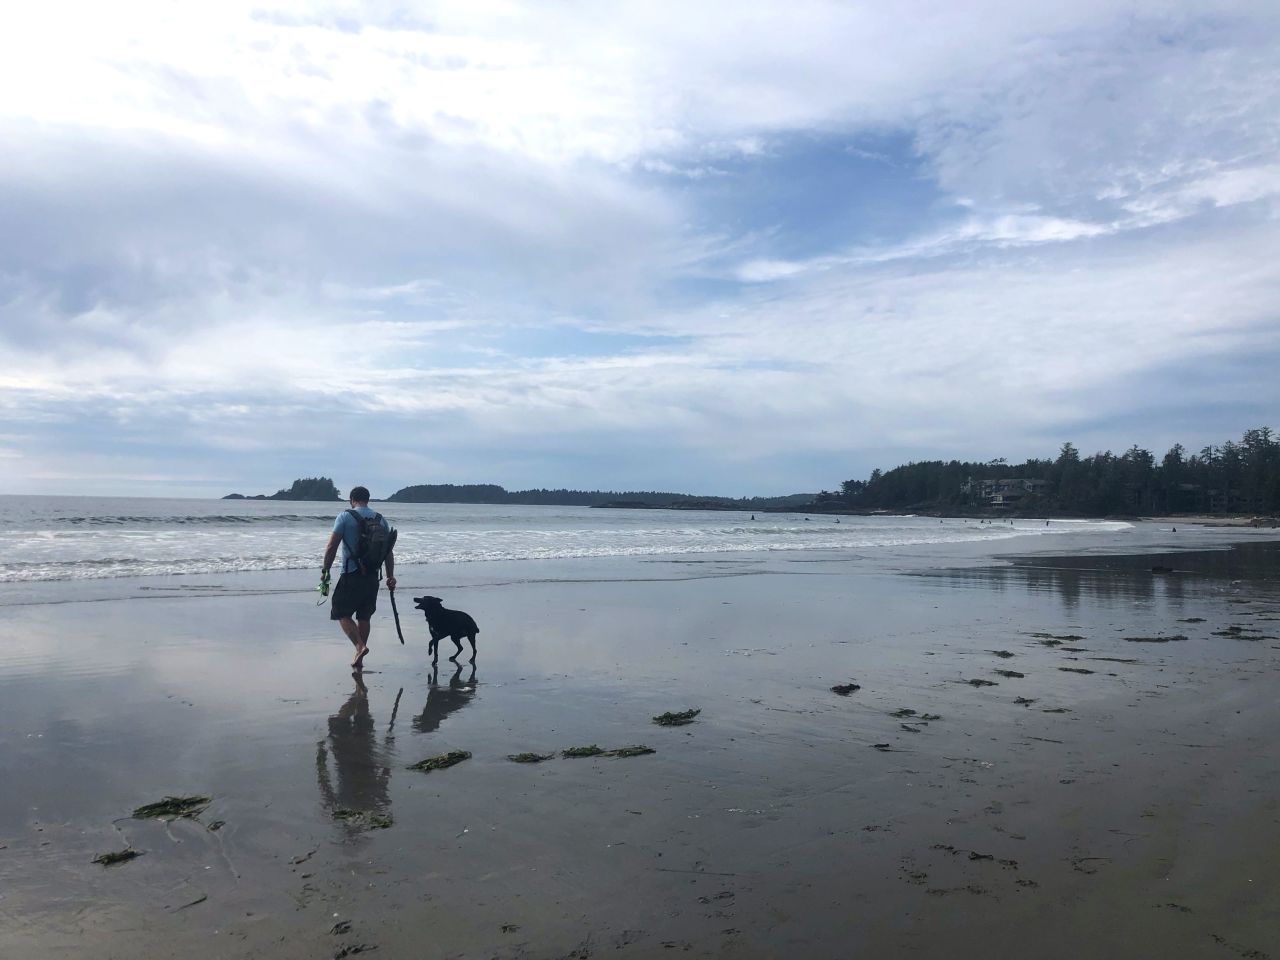 This family trip was all about the dog and her love of water.